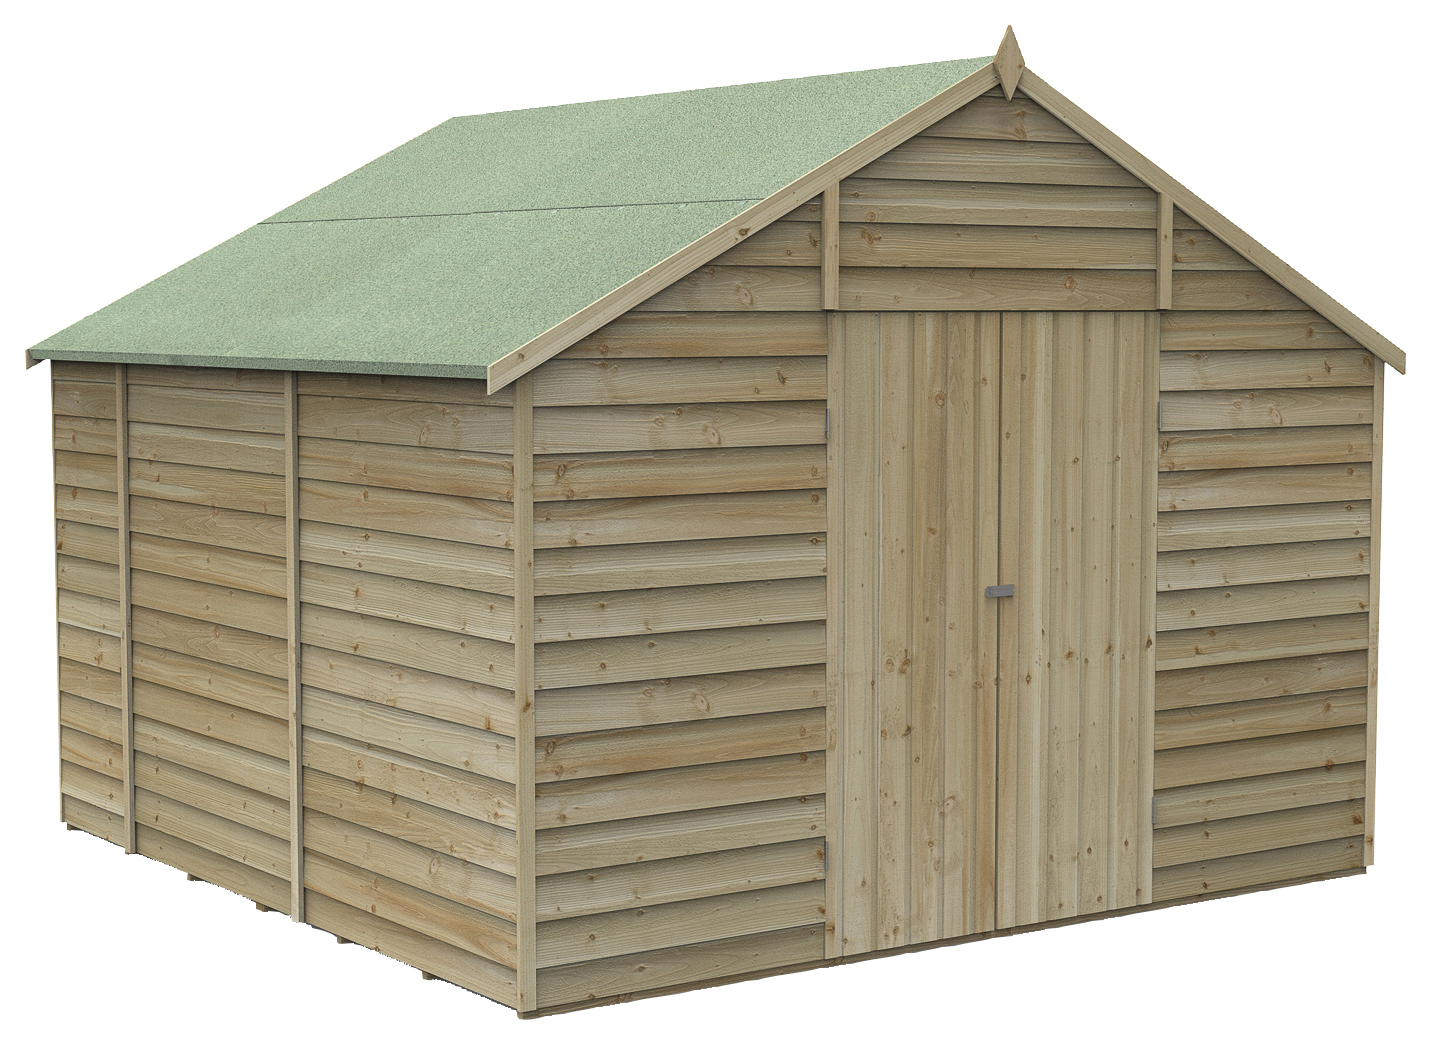 Image of Forest Garden 10 x 10ft 4Life Apex Overlap Pressure Treated Double Door Windowless Shed